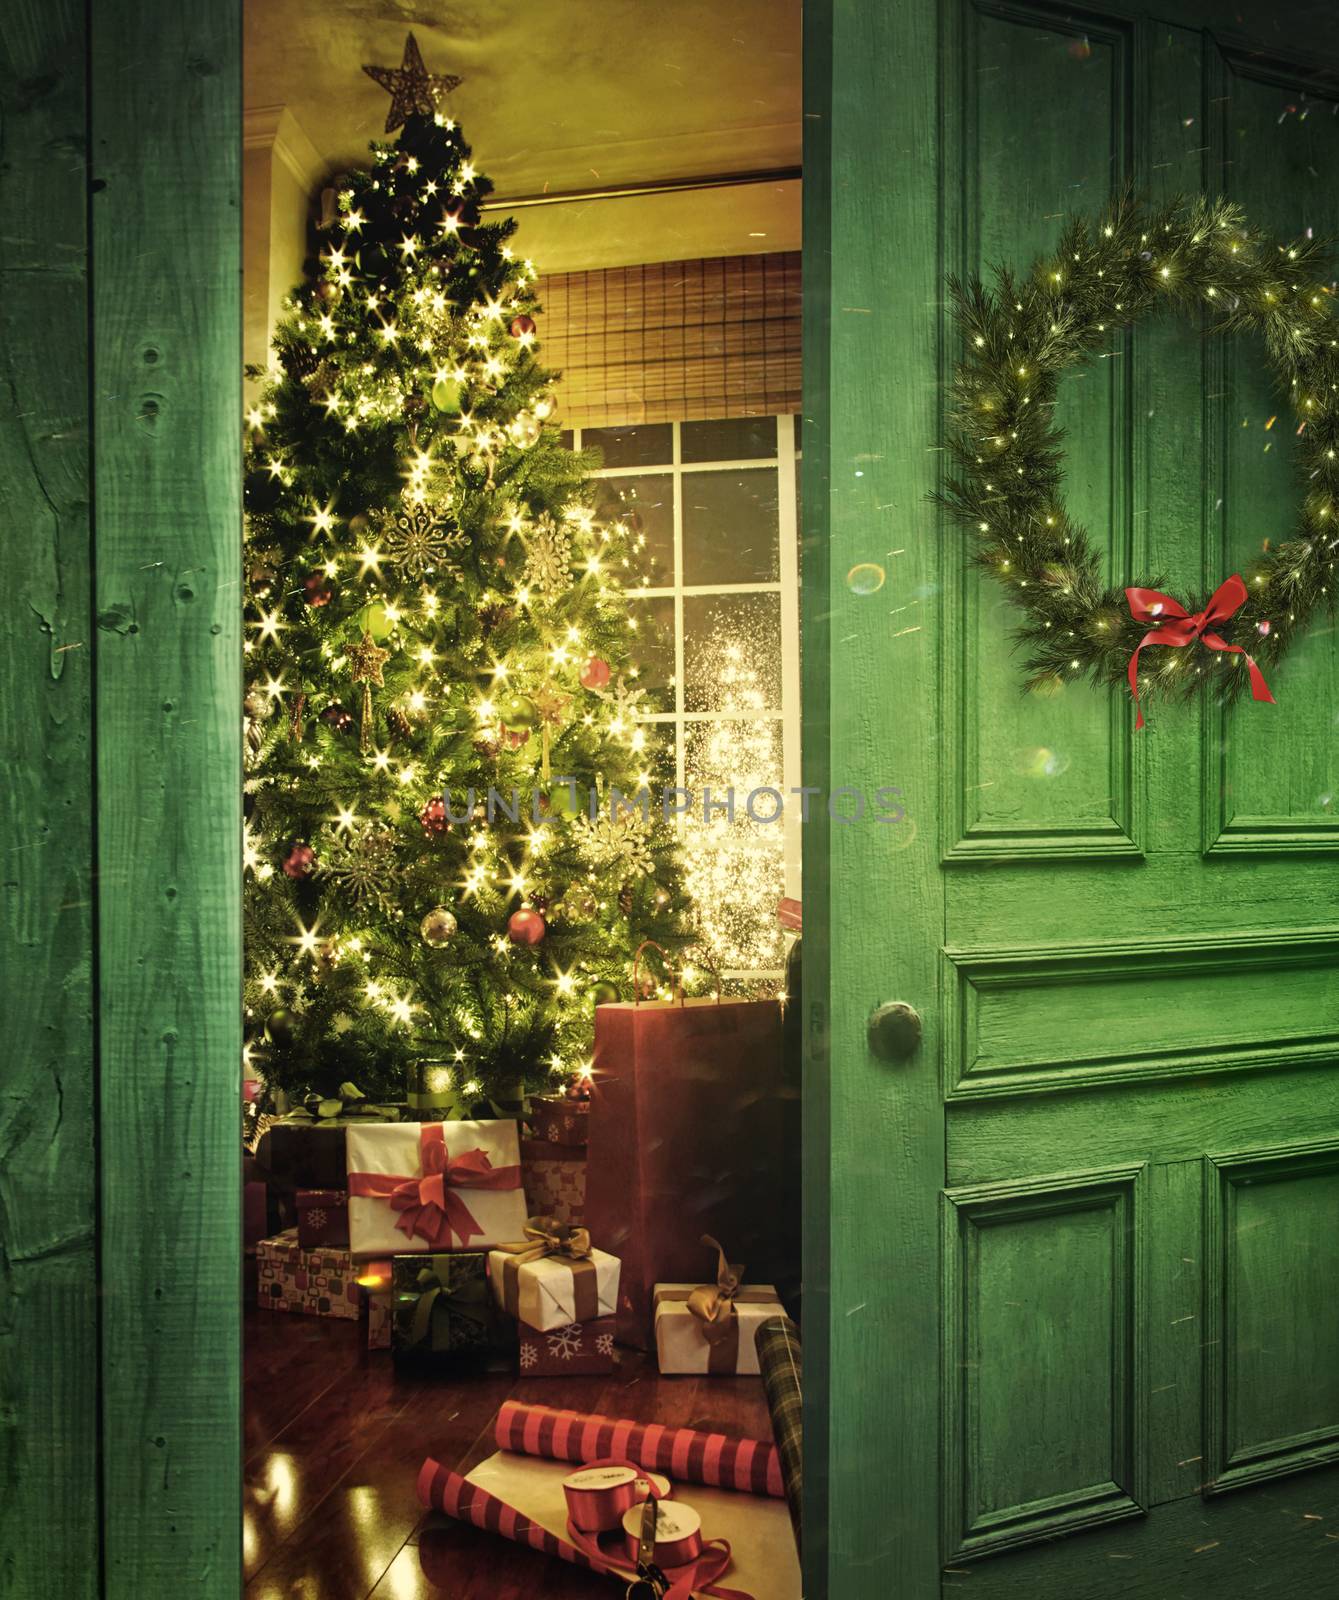 Door opening into a room with Christmas tree by Sandralise